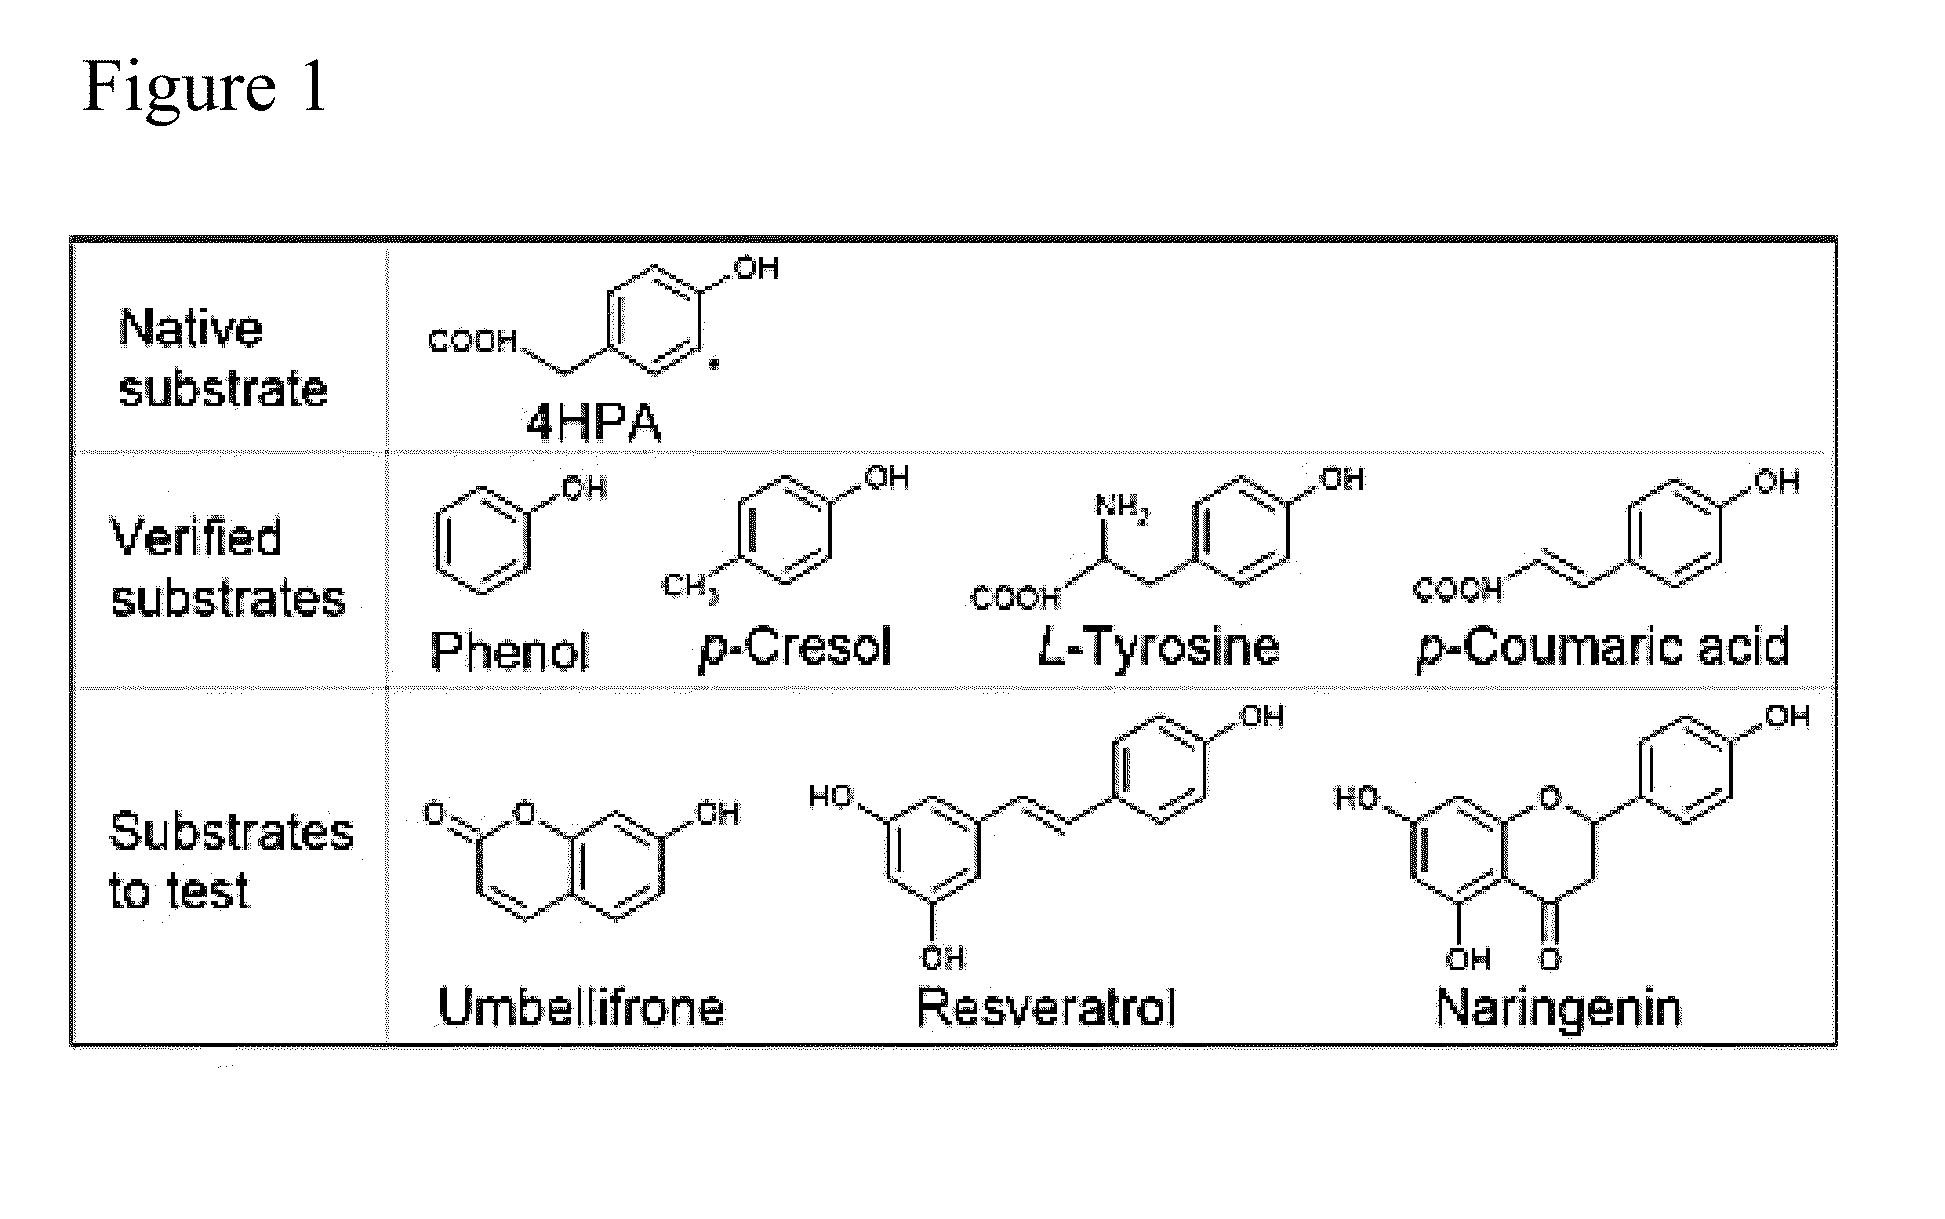 Methods for hydroxylating phenylpropanoids